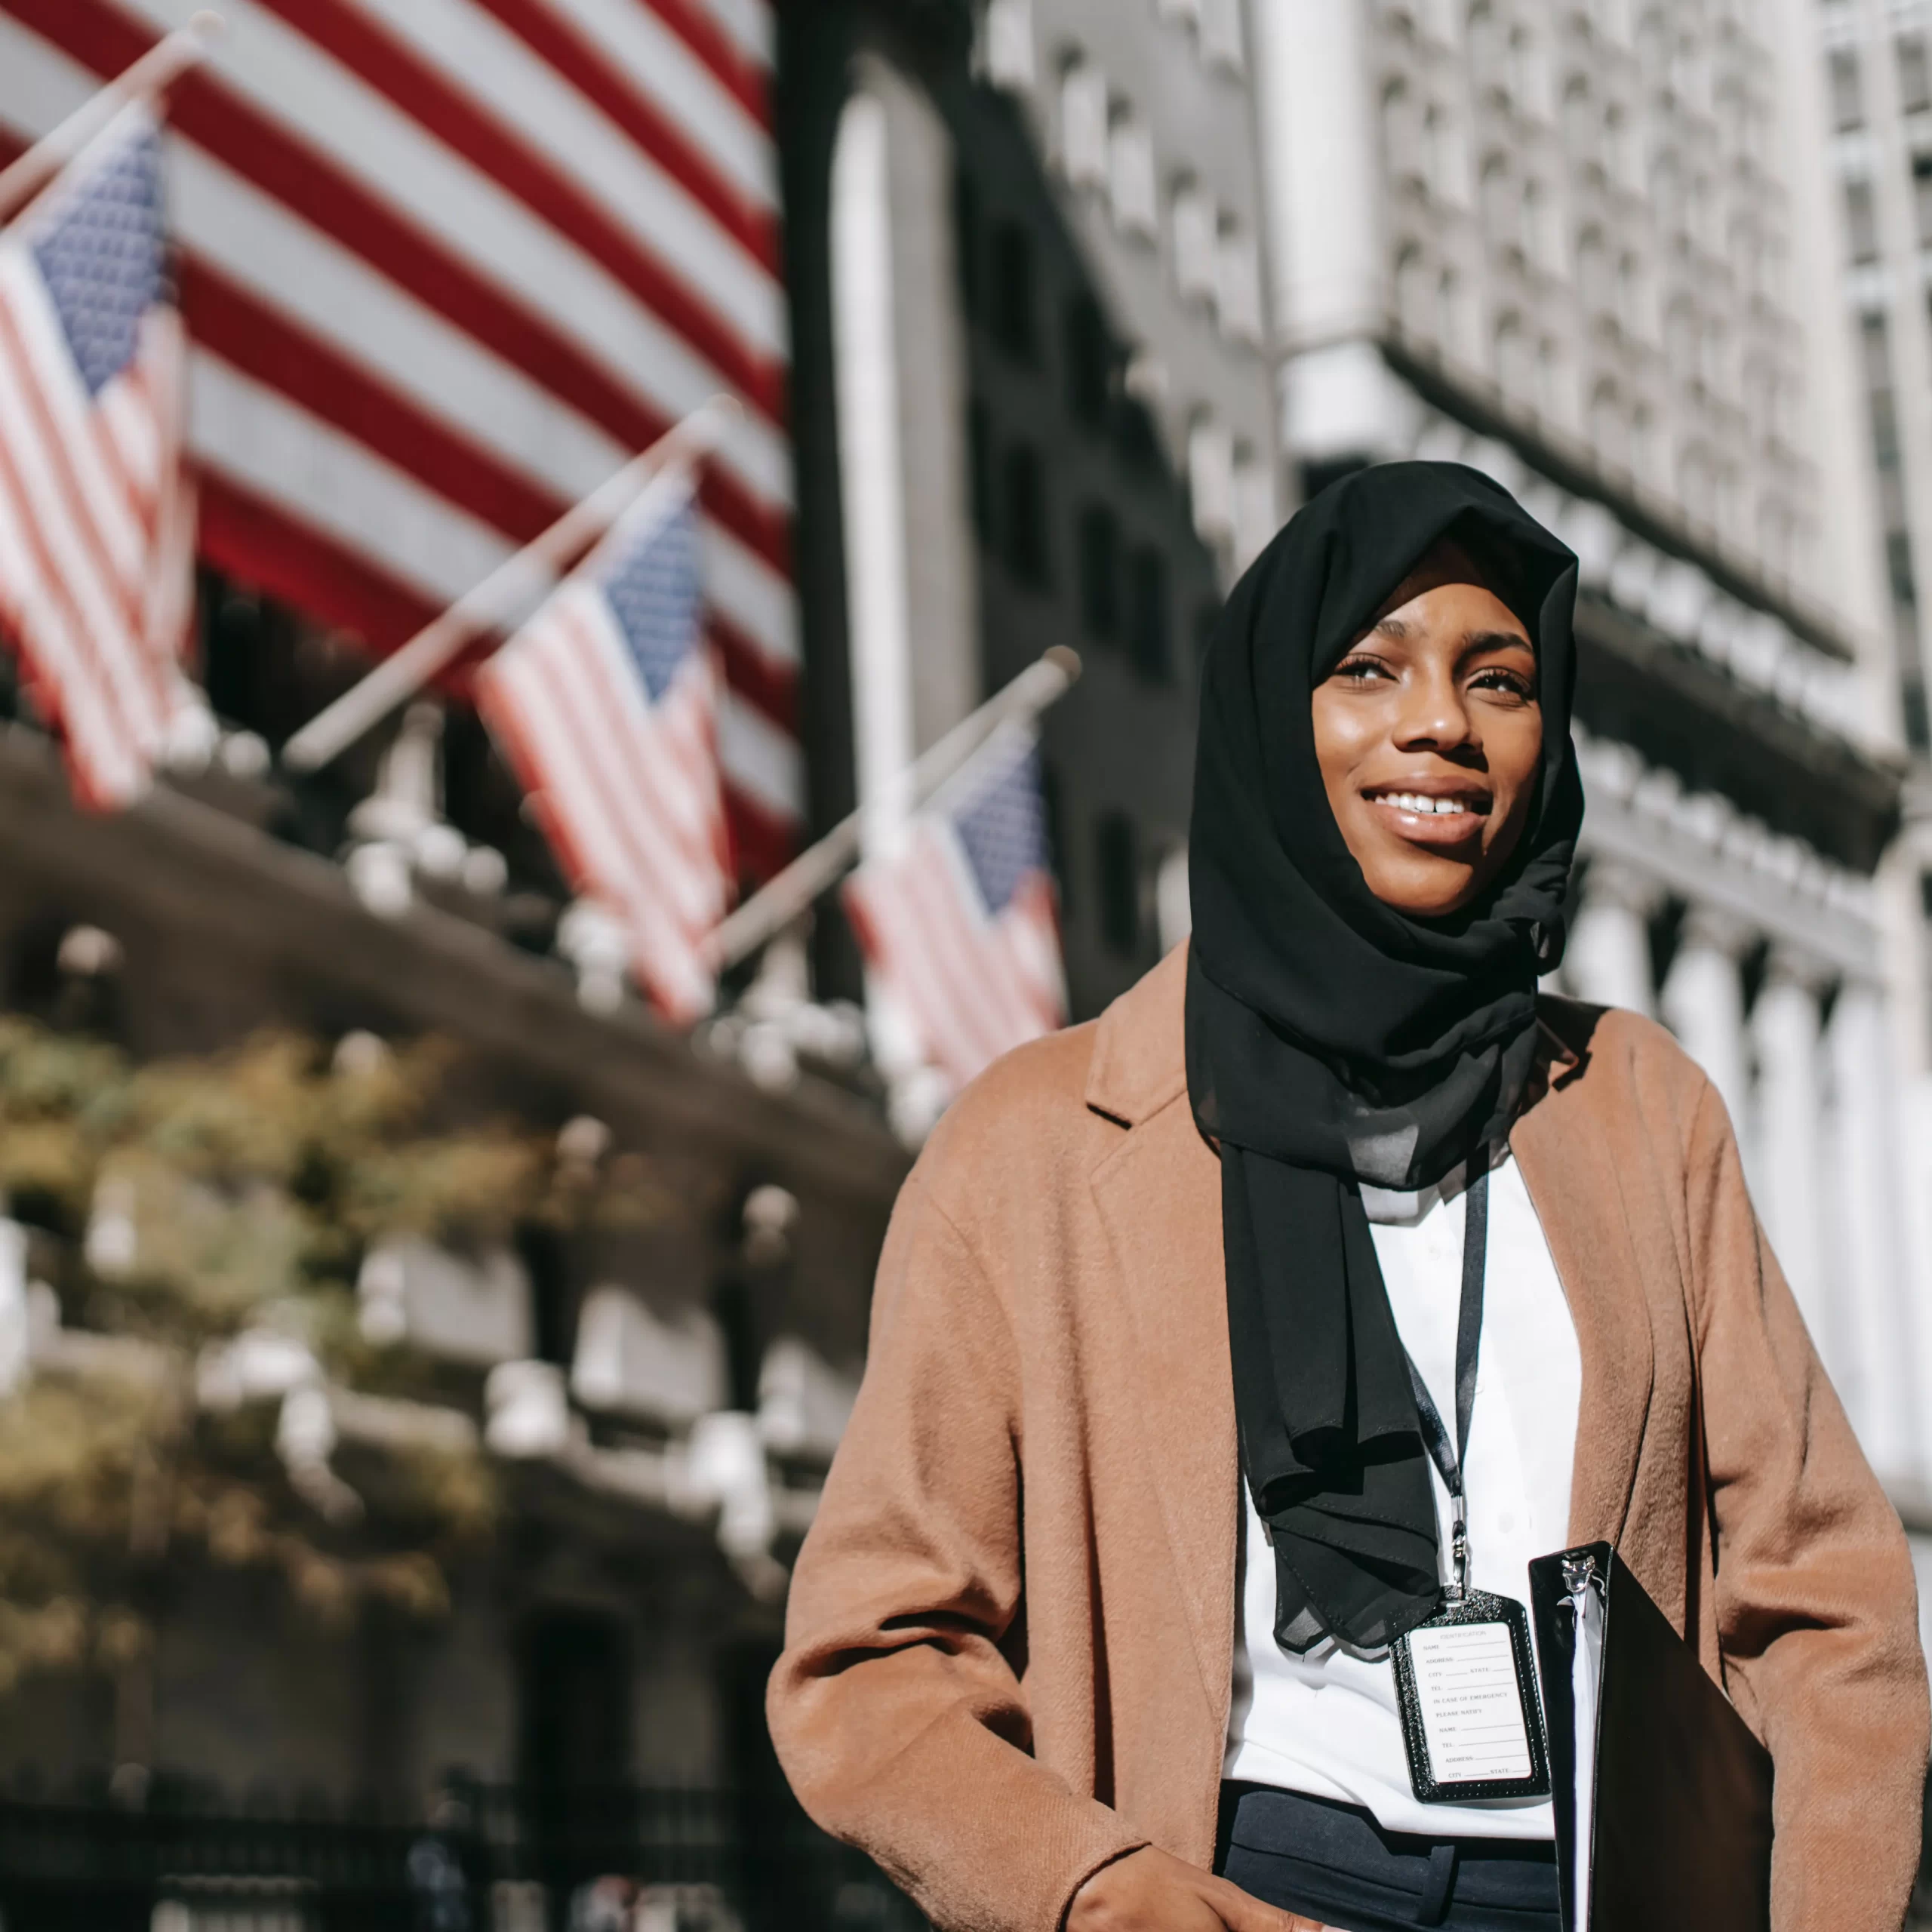 A young immigrant woman smiling outside of a building with American flags